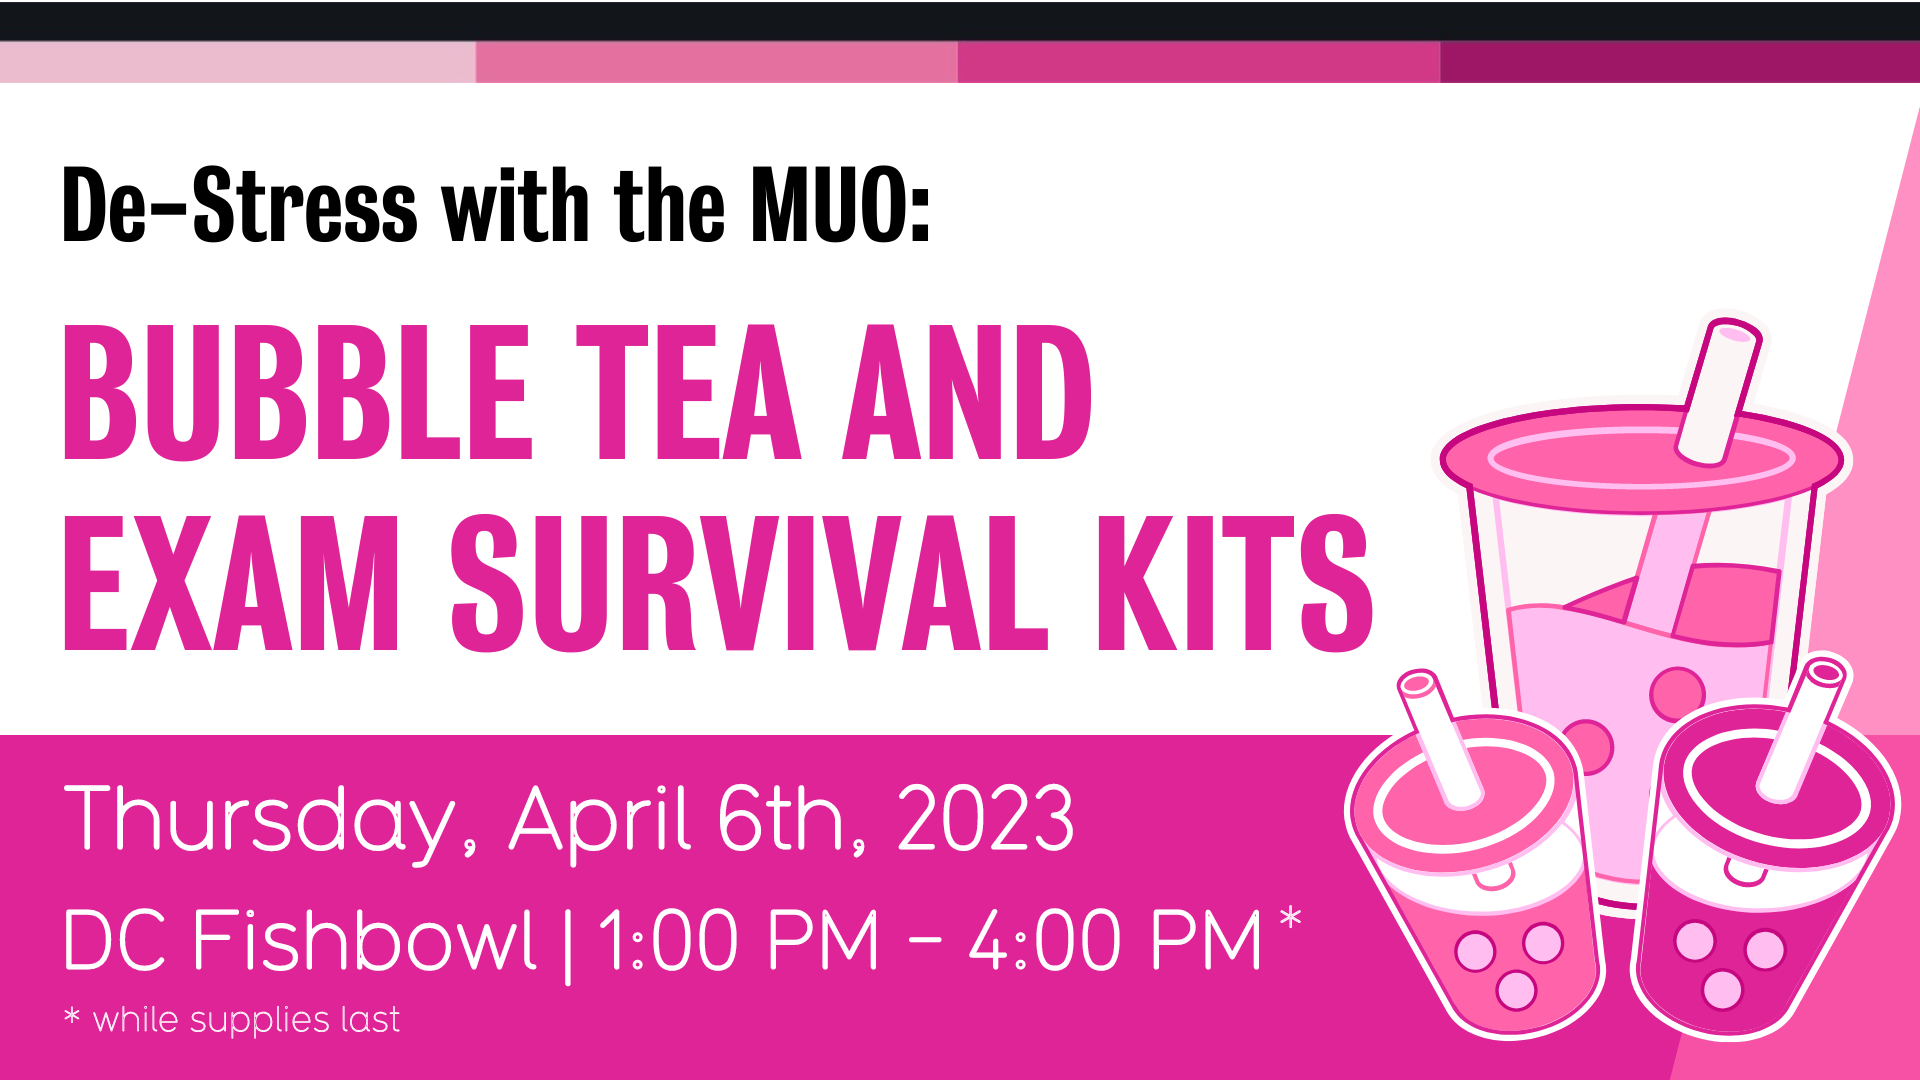 De-Stress with the MUO: Bubble Tea and Exam Survival Kits